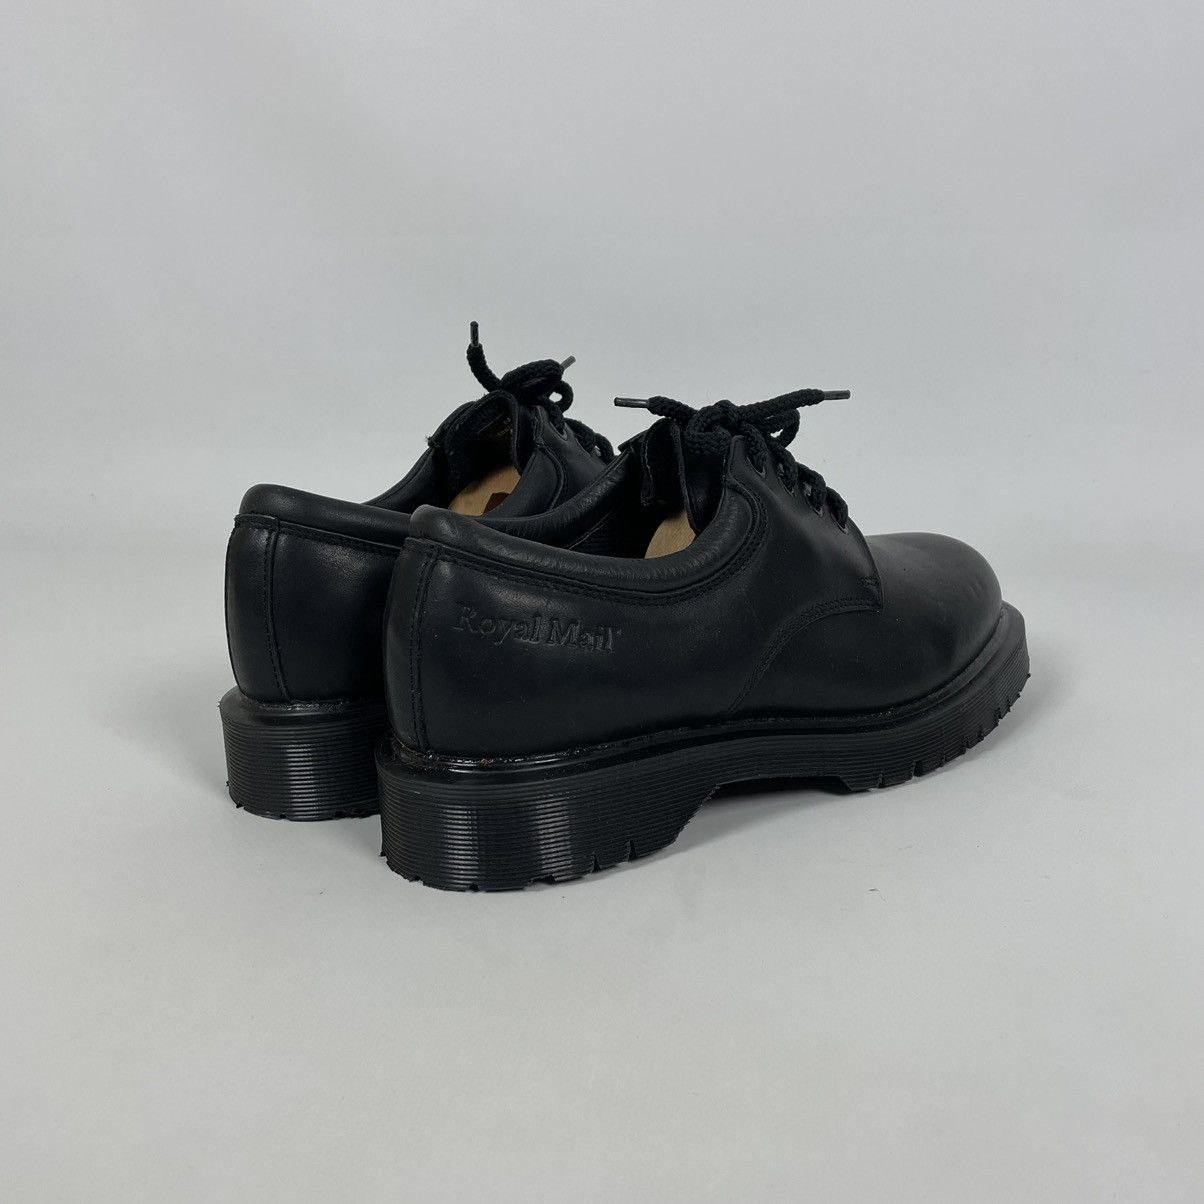 Dr. Martens Vintage Dr. Martens Royal Mail Shoes Made in England Size US 9 / EU 42 - 4 Thumbnail